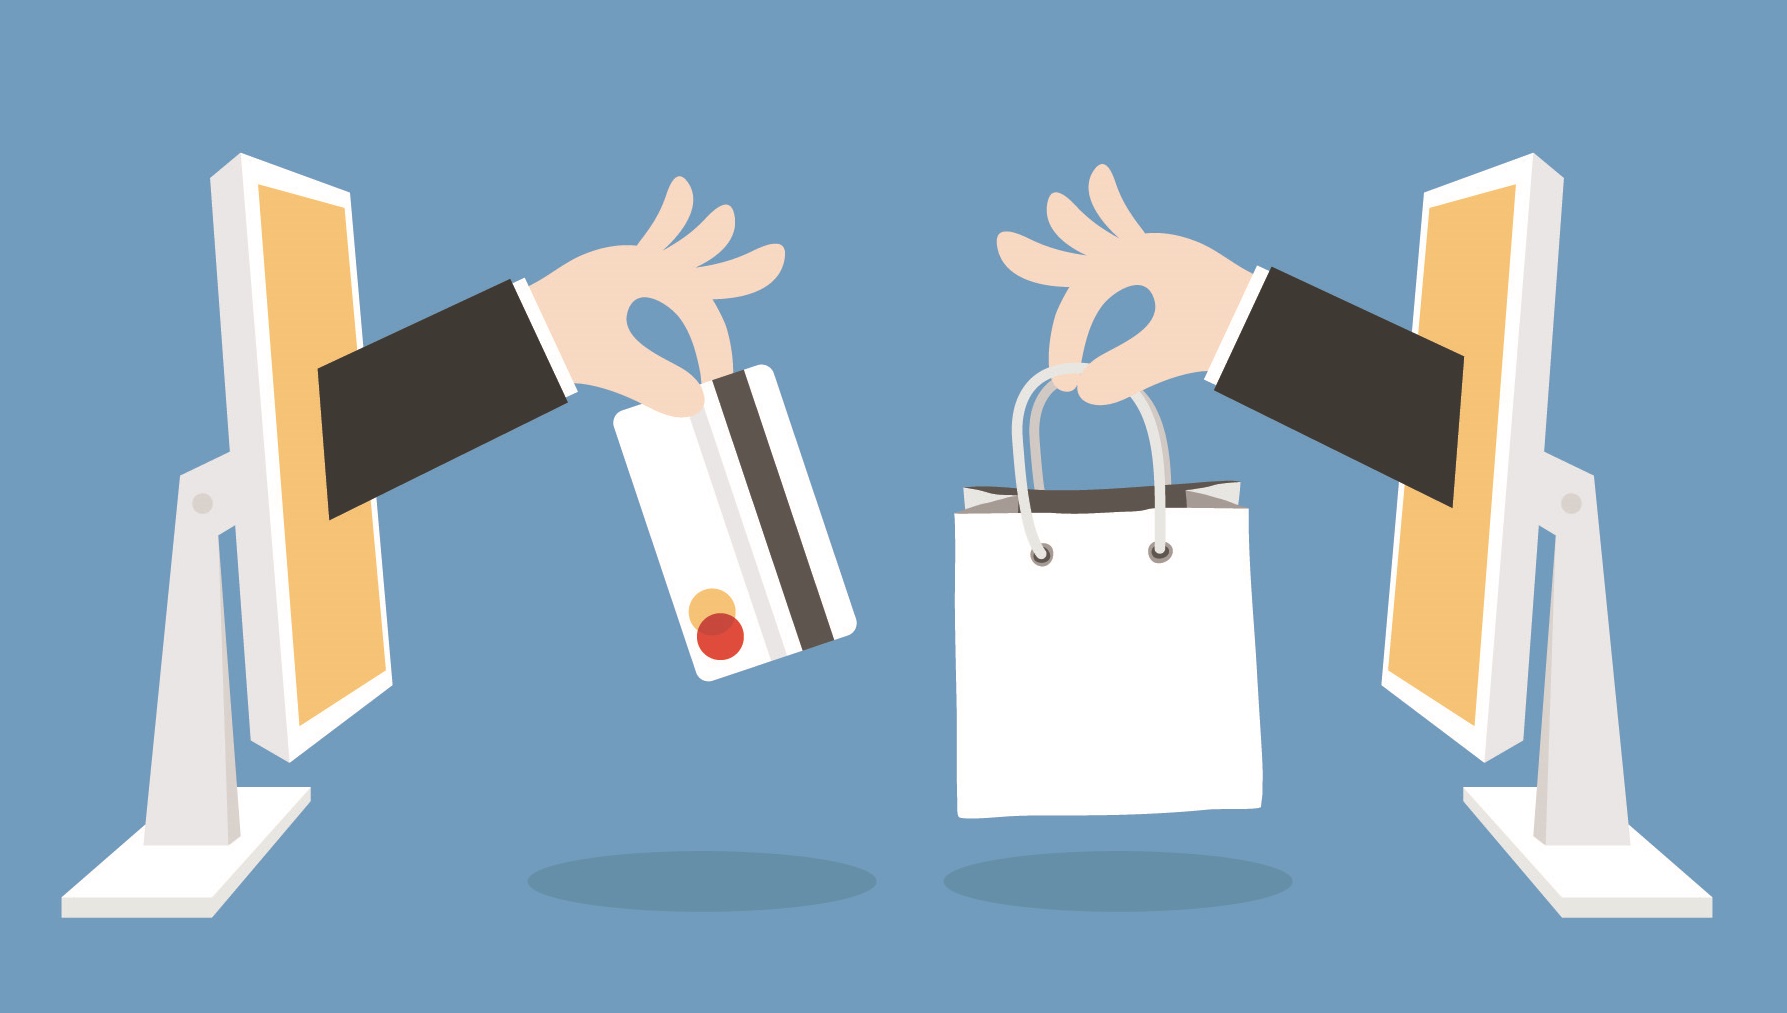 Build customers’ trust with these e-commerce tips